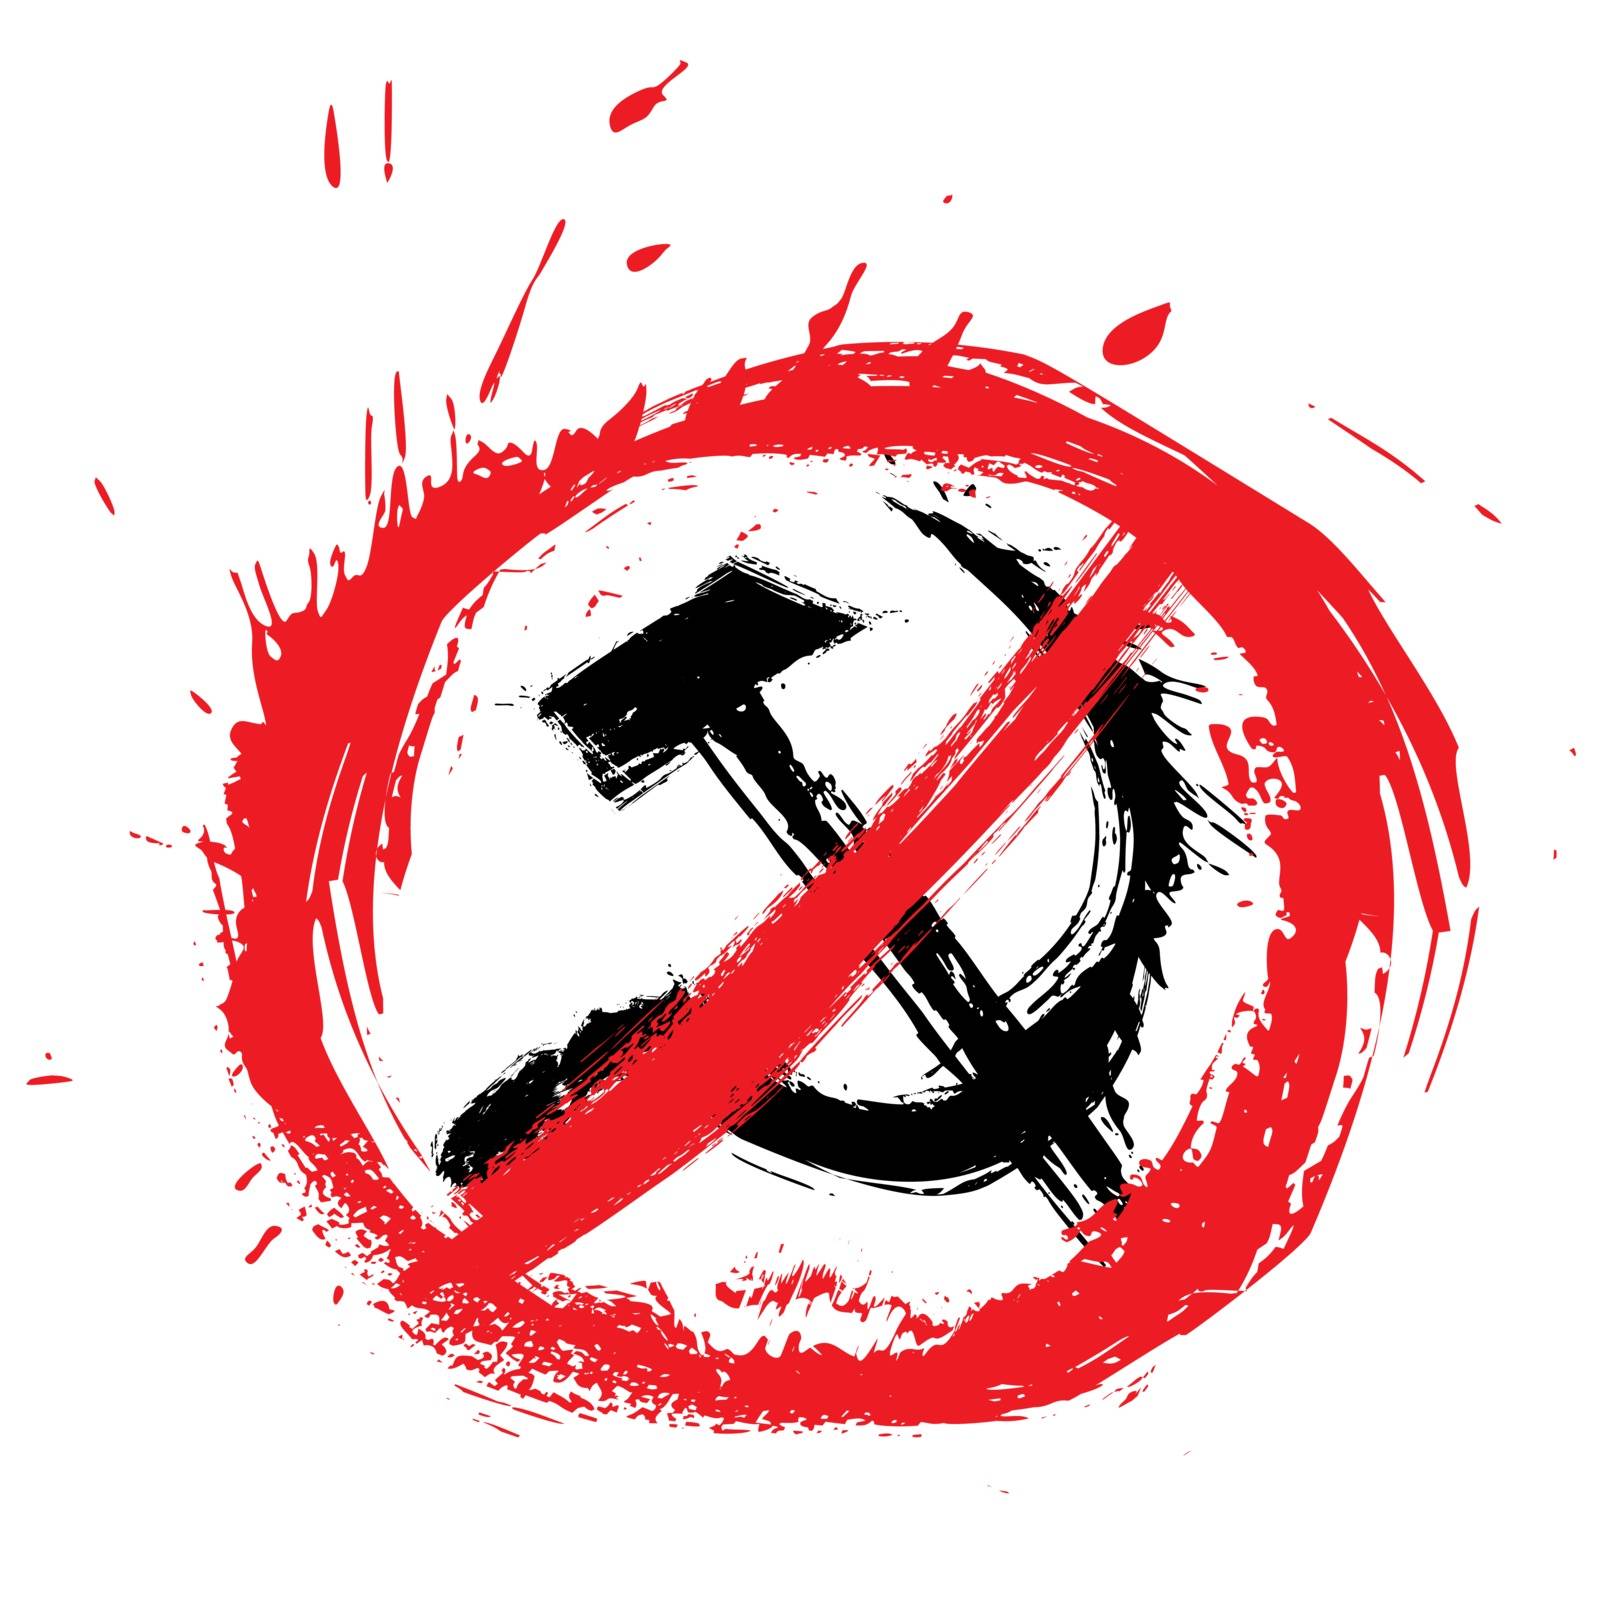 Stop communism symbol created in grunge style